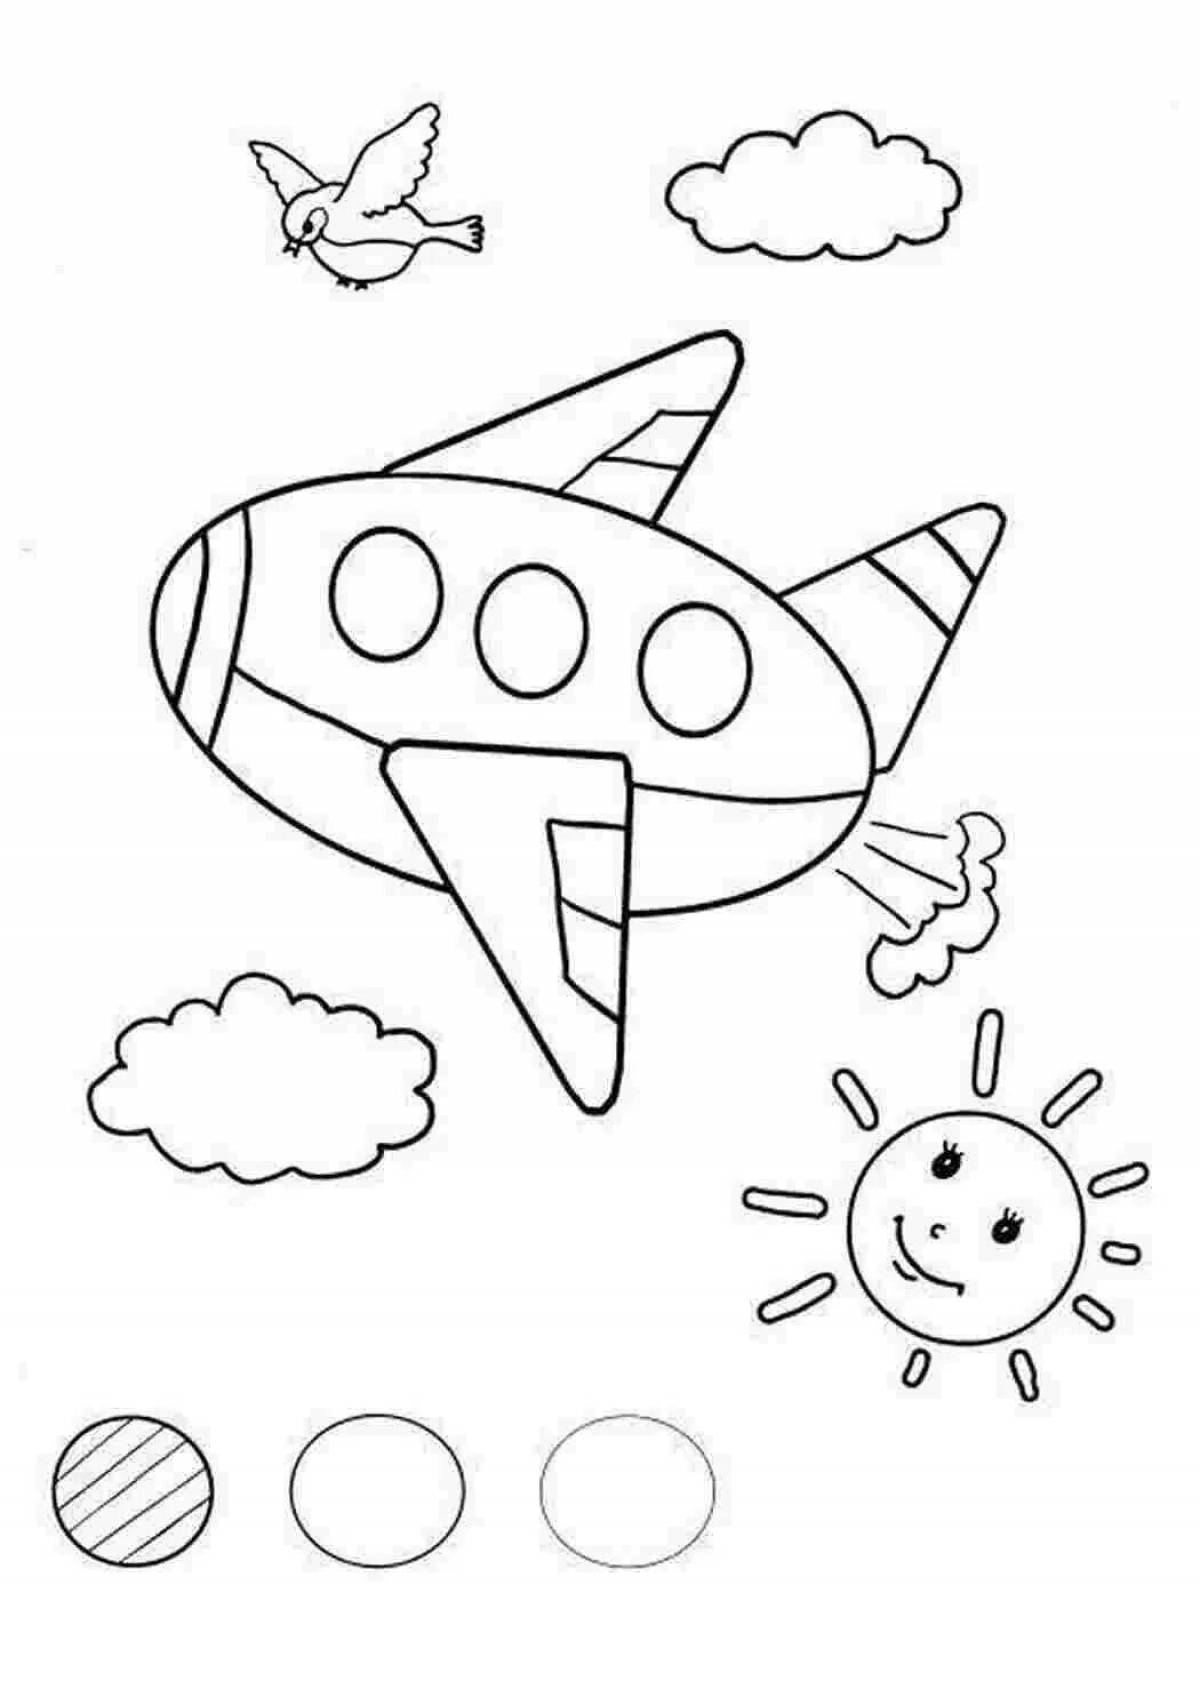 Colorful coloring pages with airplanes for children 2-3 years old